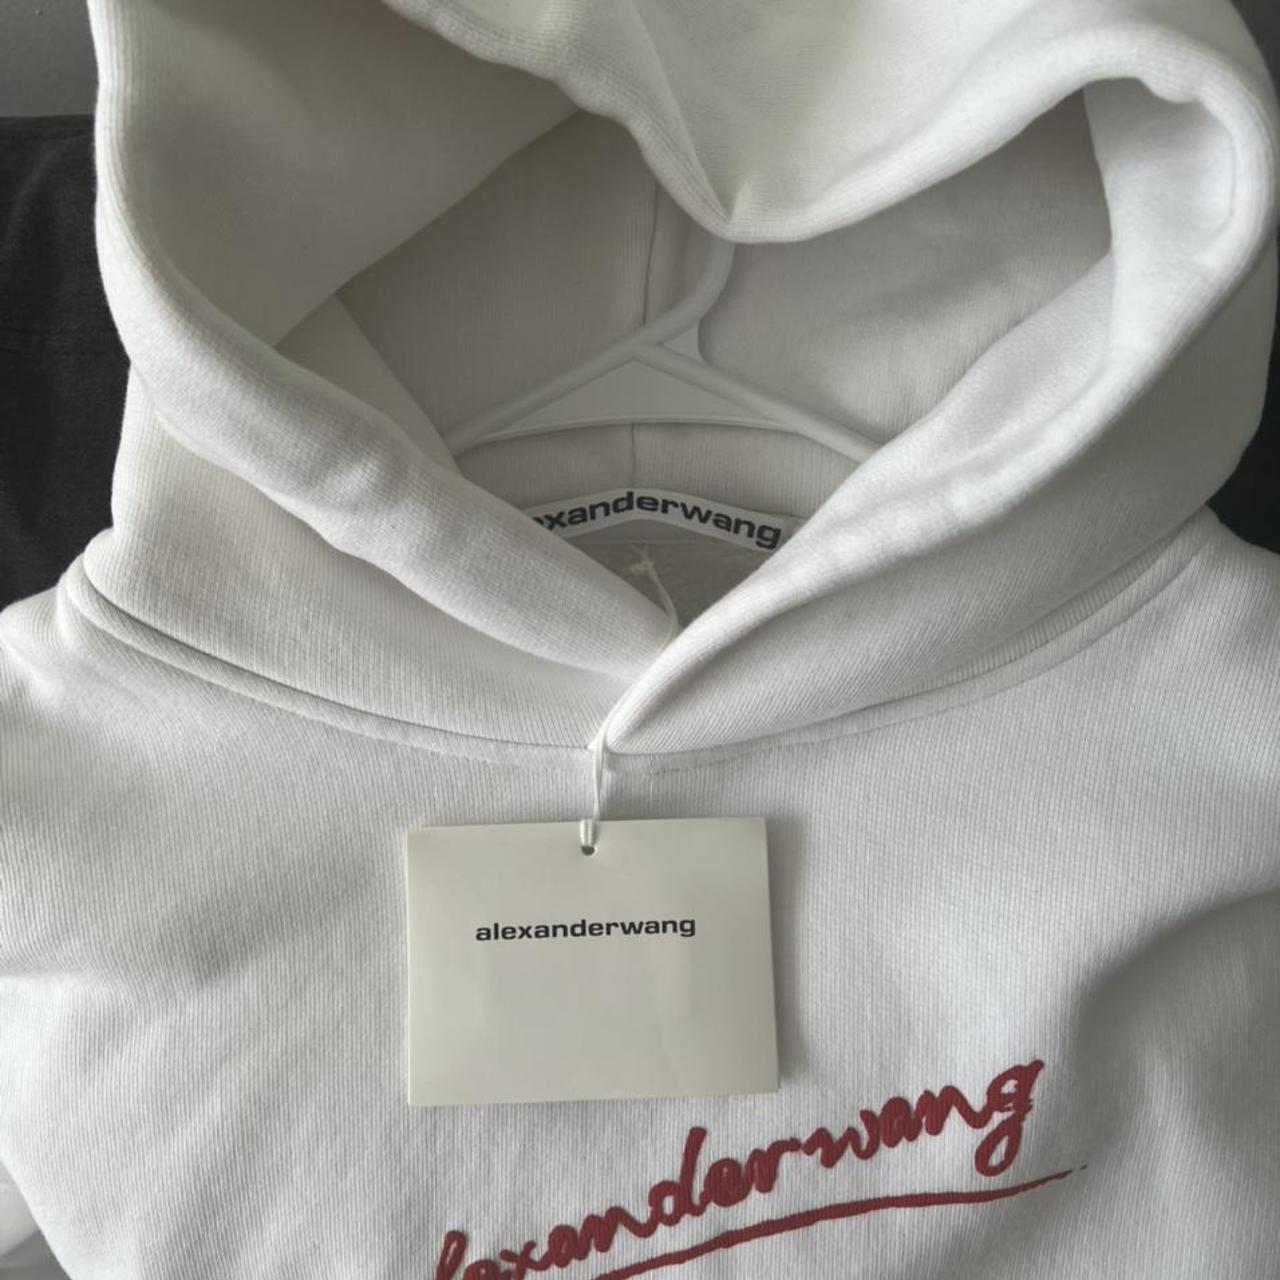 ALEXANDER WANG LIPSTICK GRAPHIC HOODIE SIZE SMALL IN... - Depop